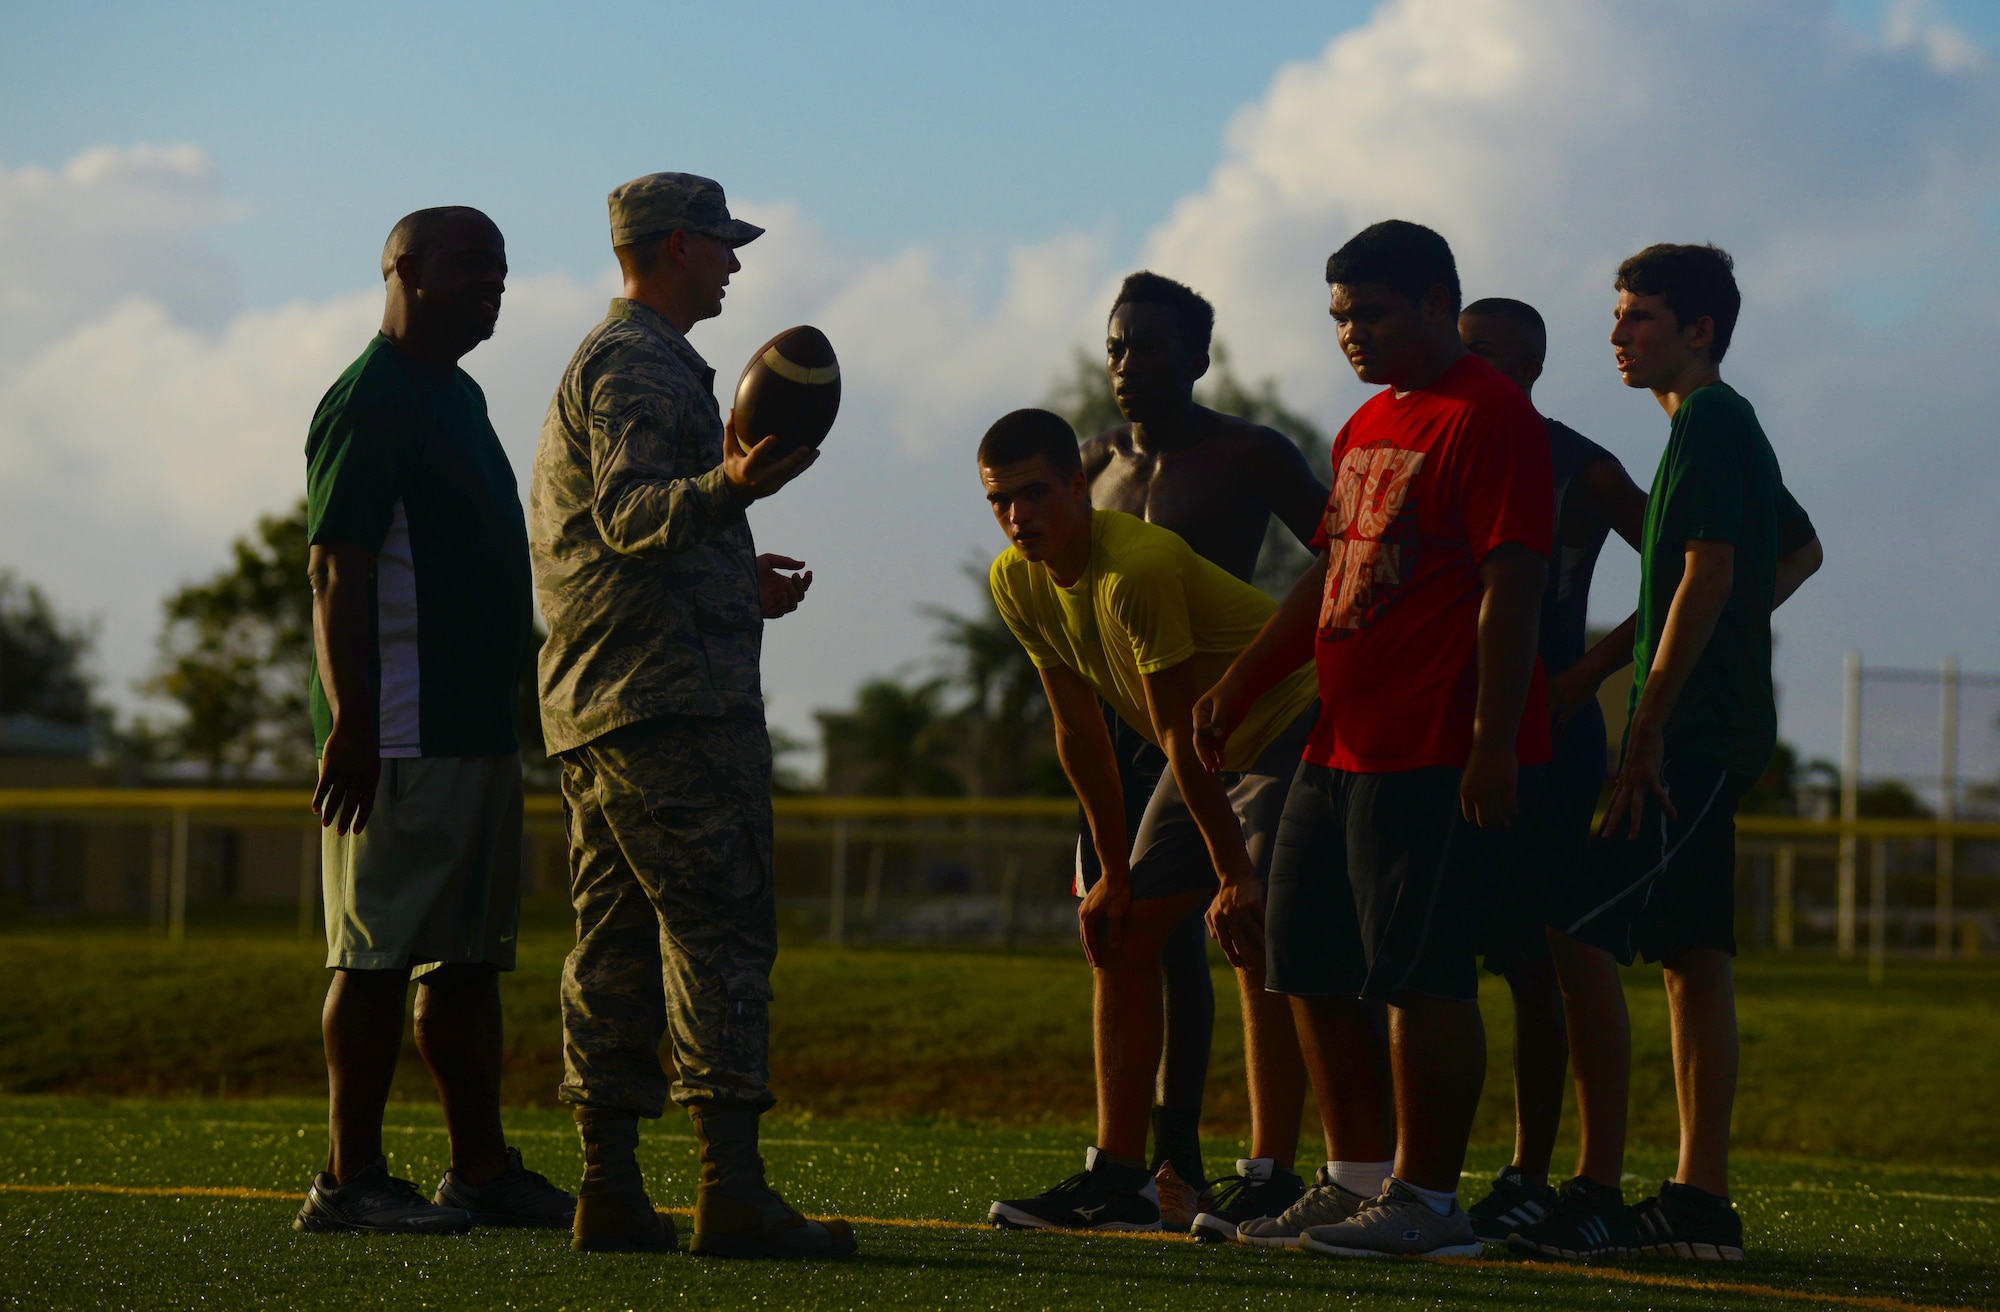 Jacob Dowdell, the Guam High School head coach, left, supervises Senior Airman Presley Griffith, a 36th Mobility Response Squadron executive assistant, second from left, as he teaches a free football spring practice camp June 8, 2015, at Andersen Air Force Base, Guam. Griffith hopes to someday become a high school football coach and volunteers his time to offer an additional preseason training opportunity to local high school athletes. (U.S. Air Force photo/Senior Airman Alexander W. Riedel)